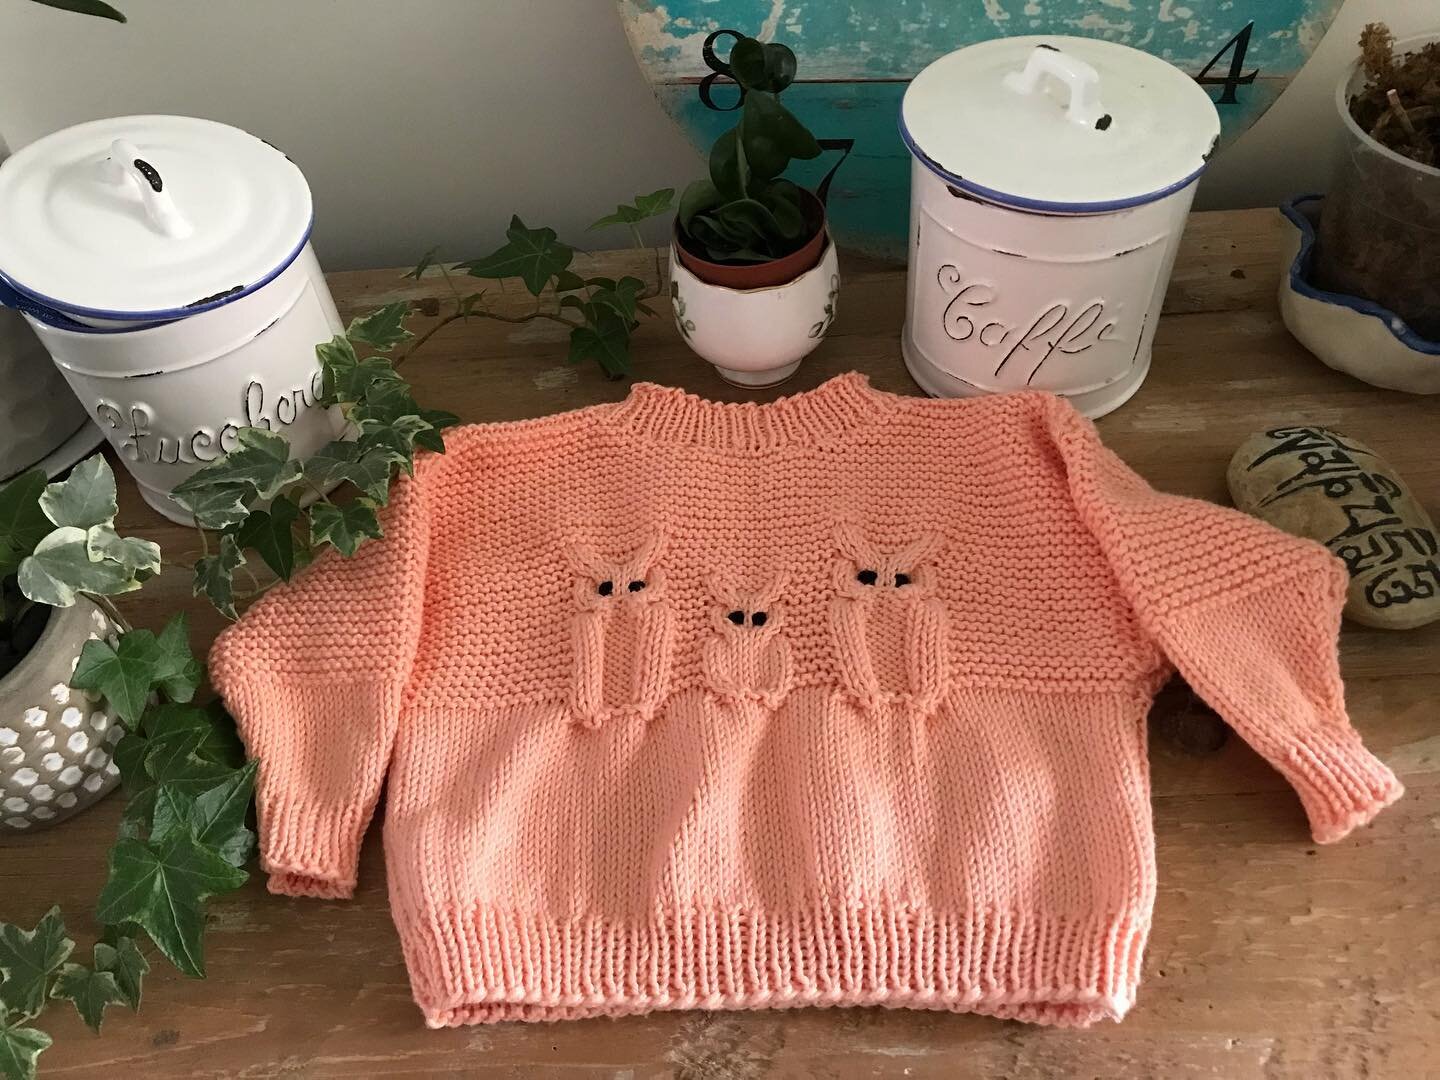 My latest creation. Check out my latest blog. Link in bio. 

#owl #jumper #baby #gift #knitting #relaxation #zen #gma #grandmother #grandchildren #love #loveknitting #pattern #family #crochet #handmade #madewithlove #cute